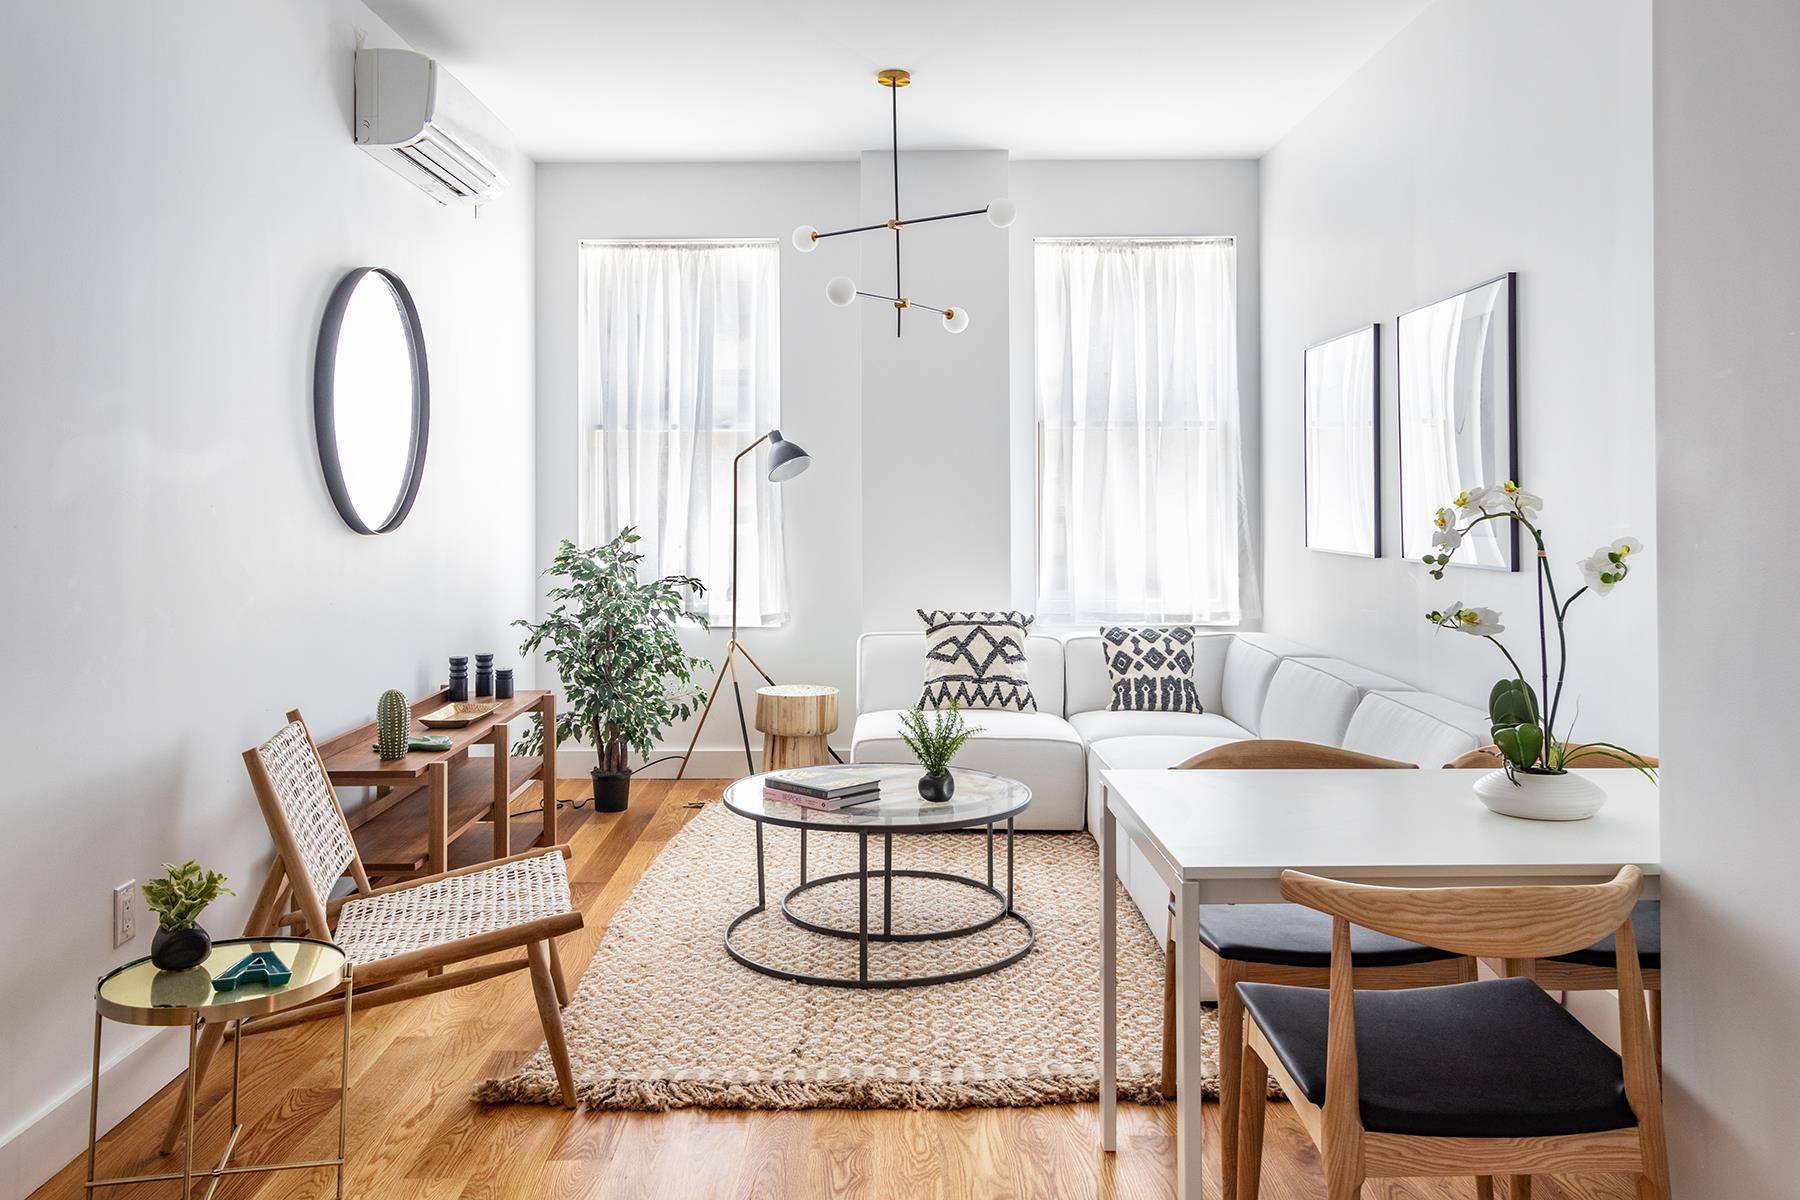 Immediate Move in ! Your three bedroom, two bathroom at 906 Prospect is not only located within one of Brooklyn's most vibrant historic neighborhoods, but the boutique building offers all ...